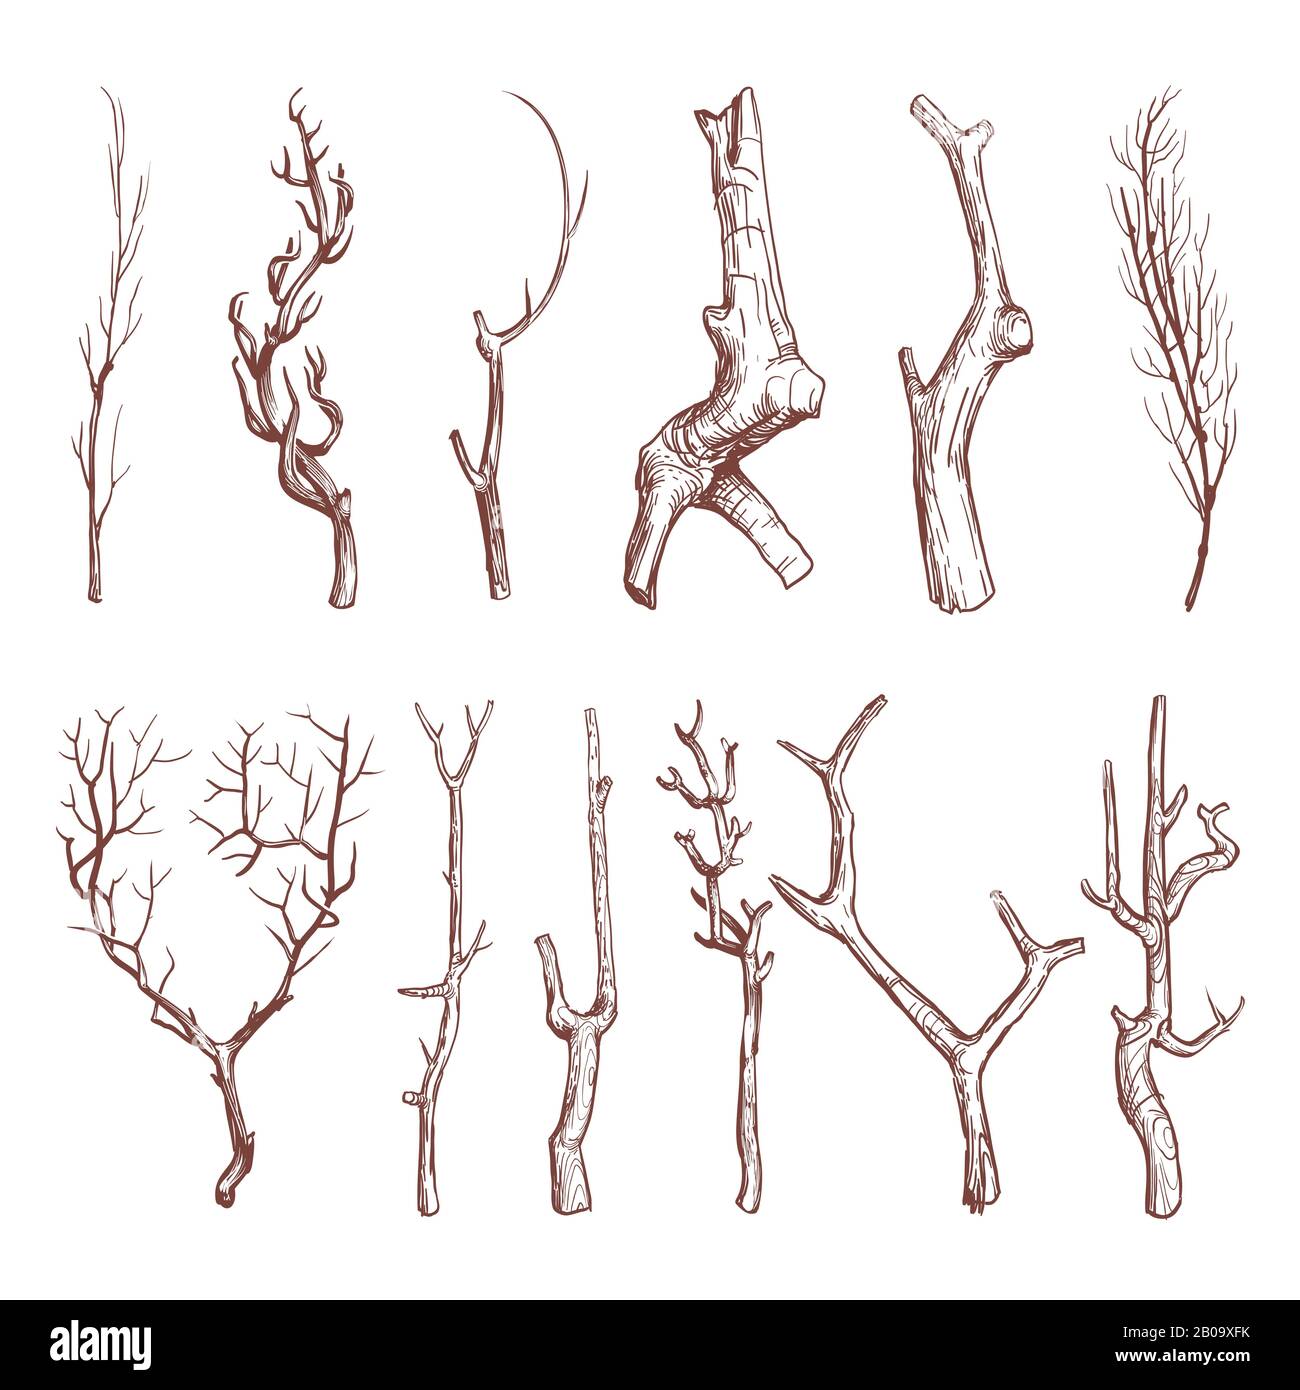 Sketch Wood Twigs Broken Tree Branches Vector Set Botany Wood Twig Collection Of Sketch Dry Twig Limb Illustration Stock Vector Image Art Alamy